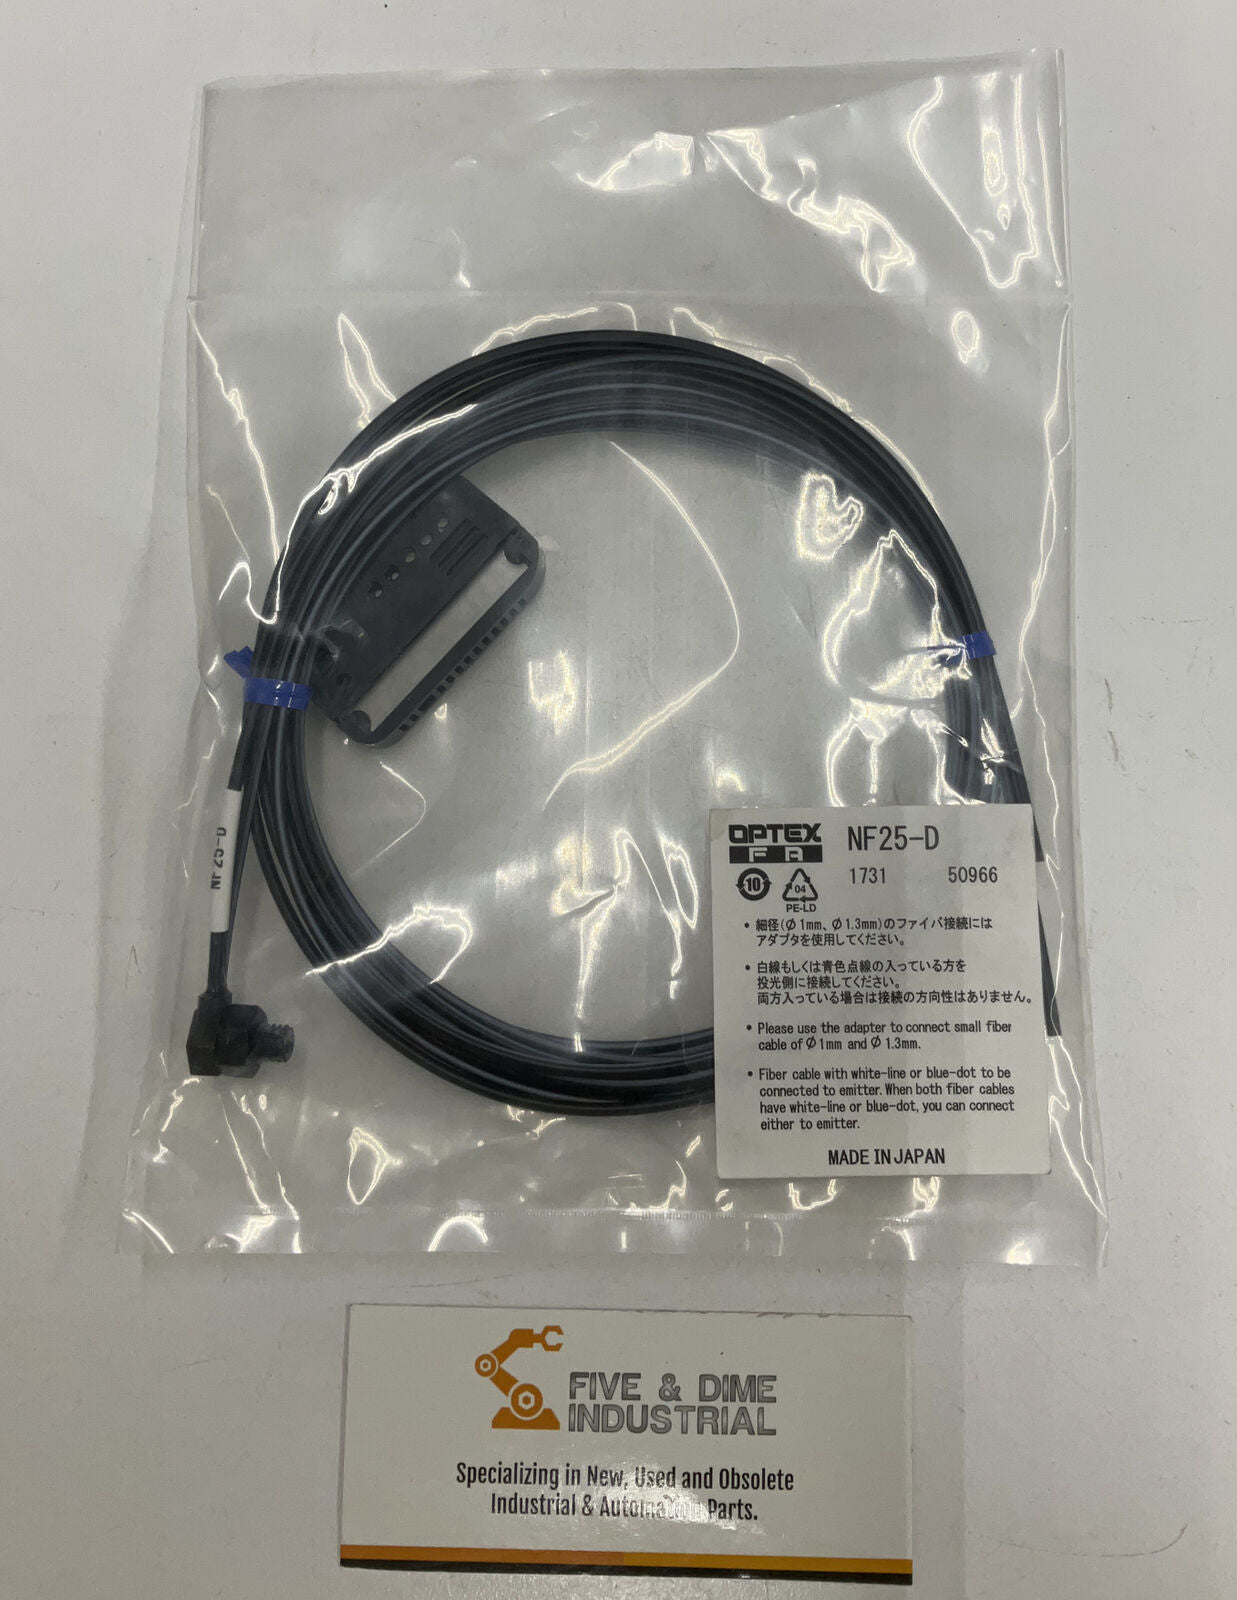 Optex NF25-D Fiber Optic Cable & Cutter 90 Degree M6 2 Meters (CL205)